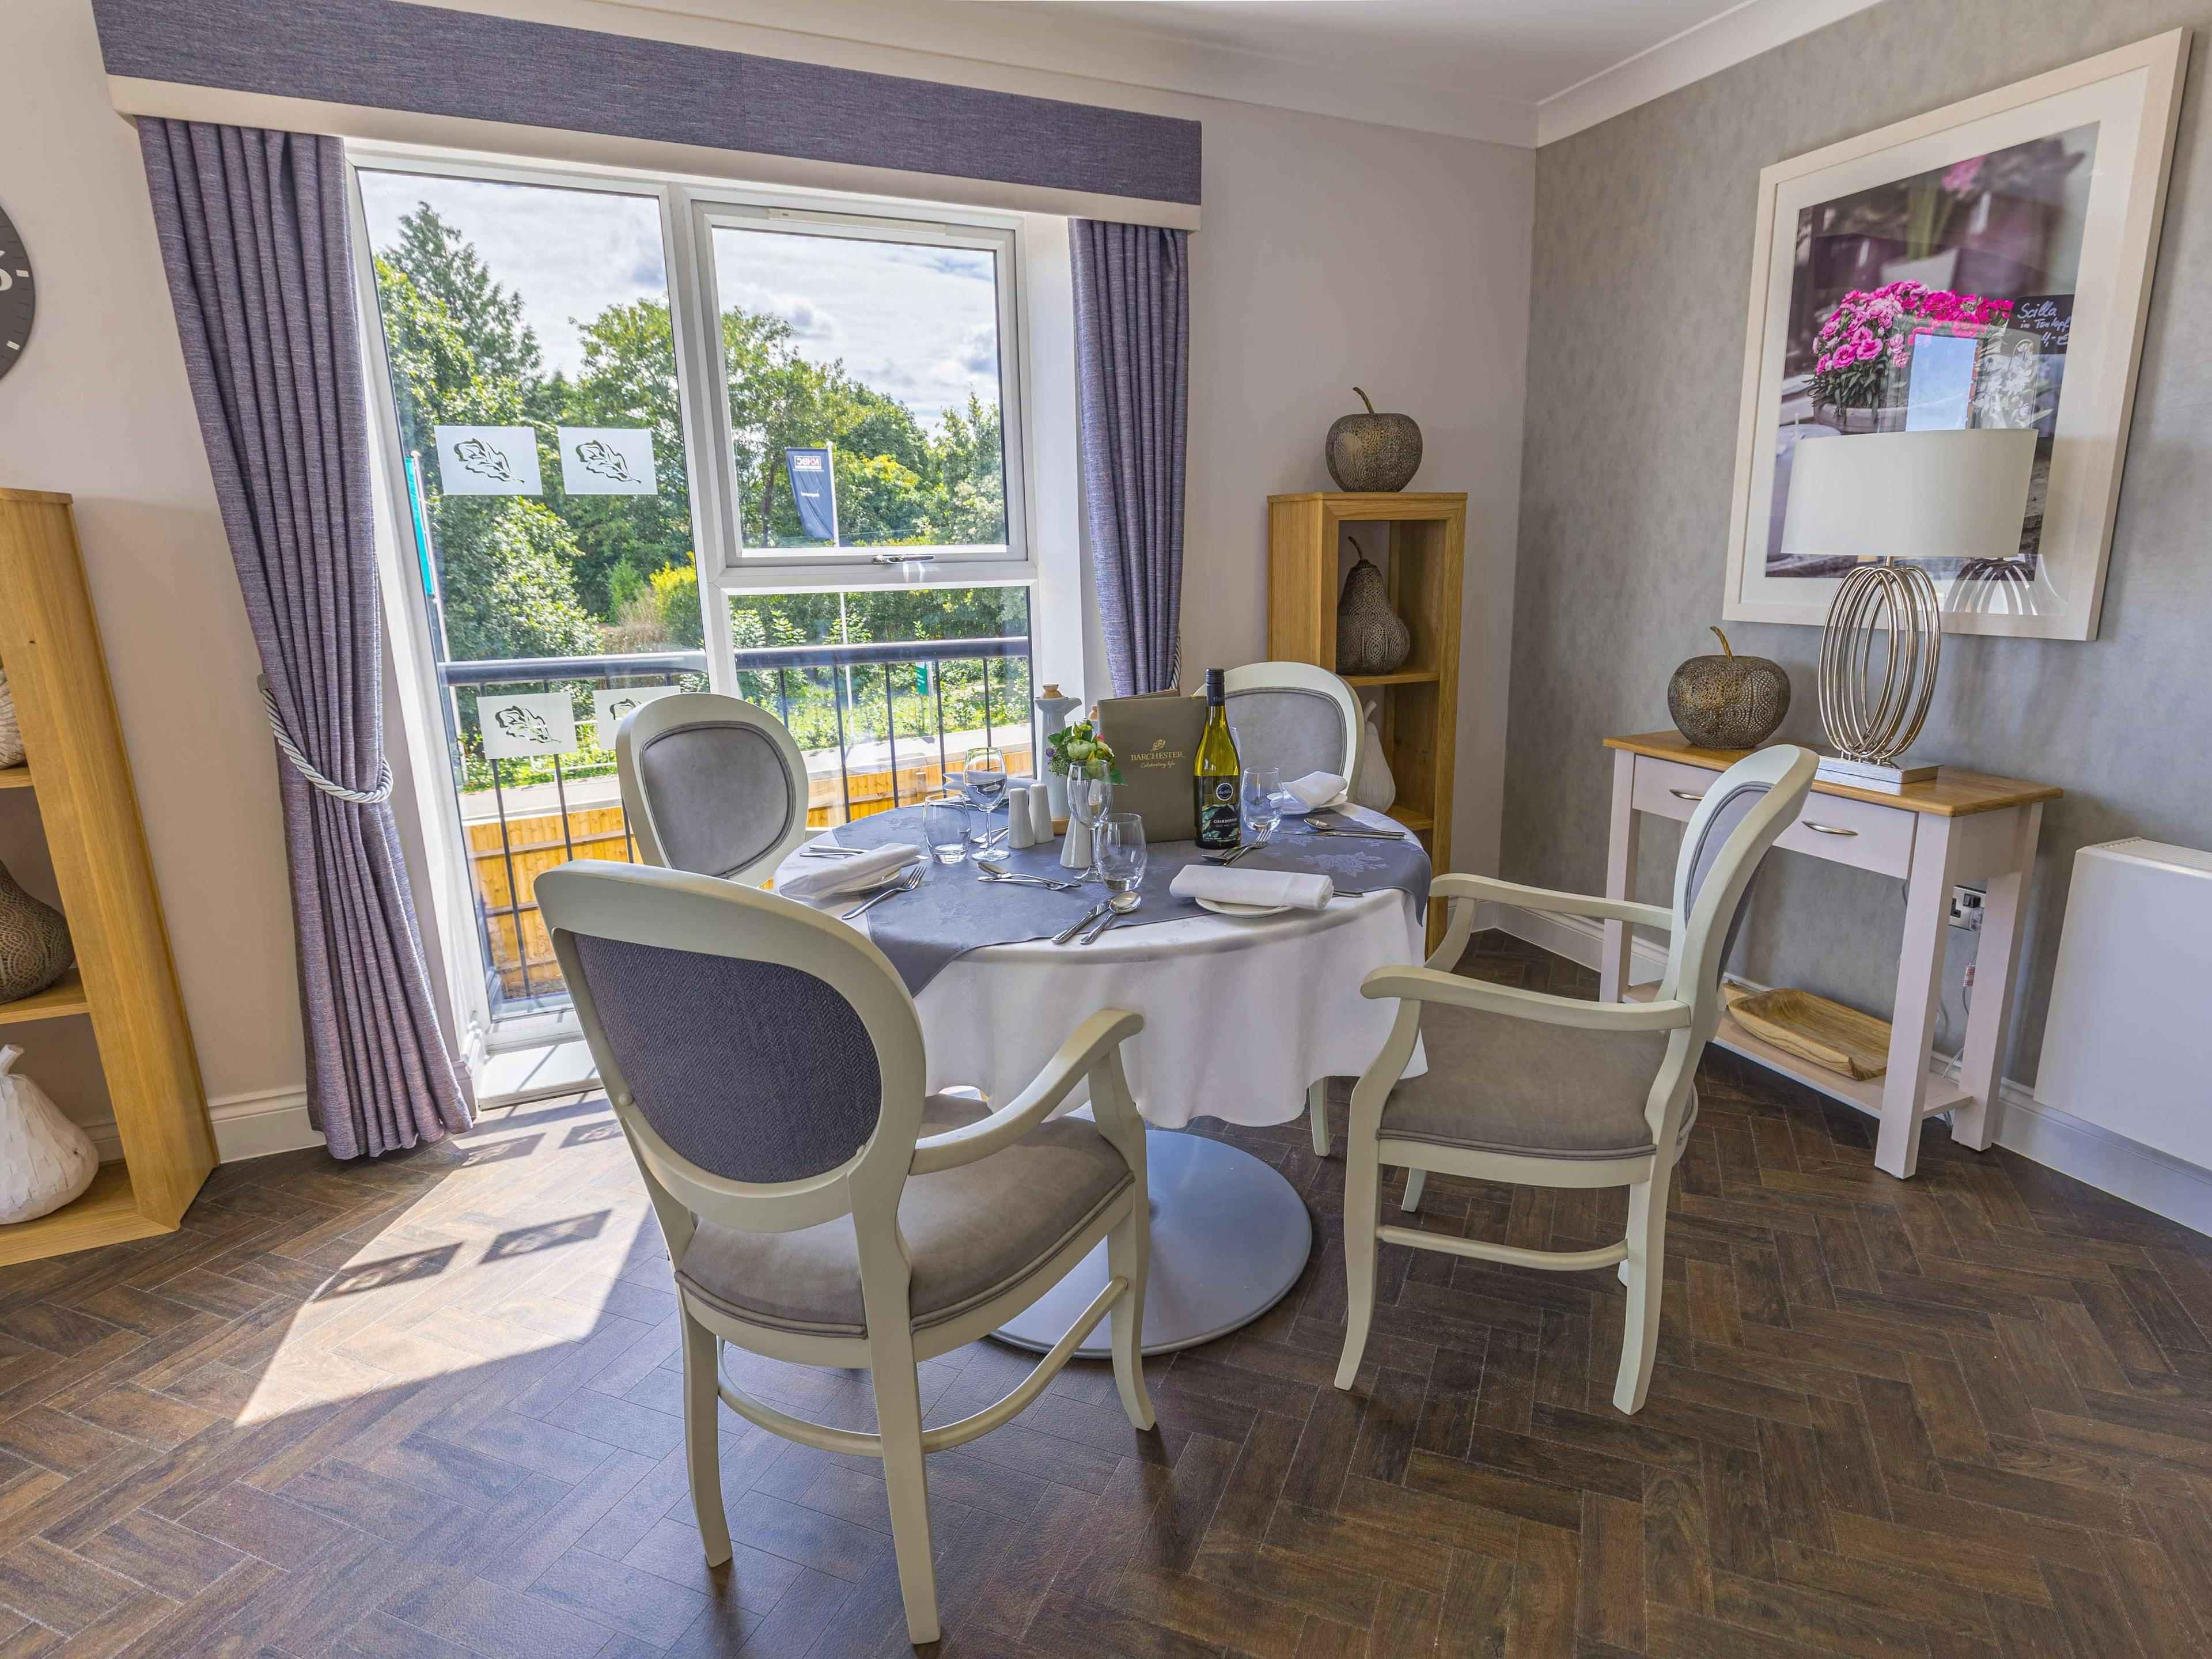 Dining Room at Elgar Court Care Home in Malvern, Worcestershire